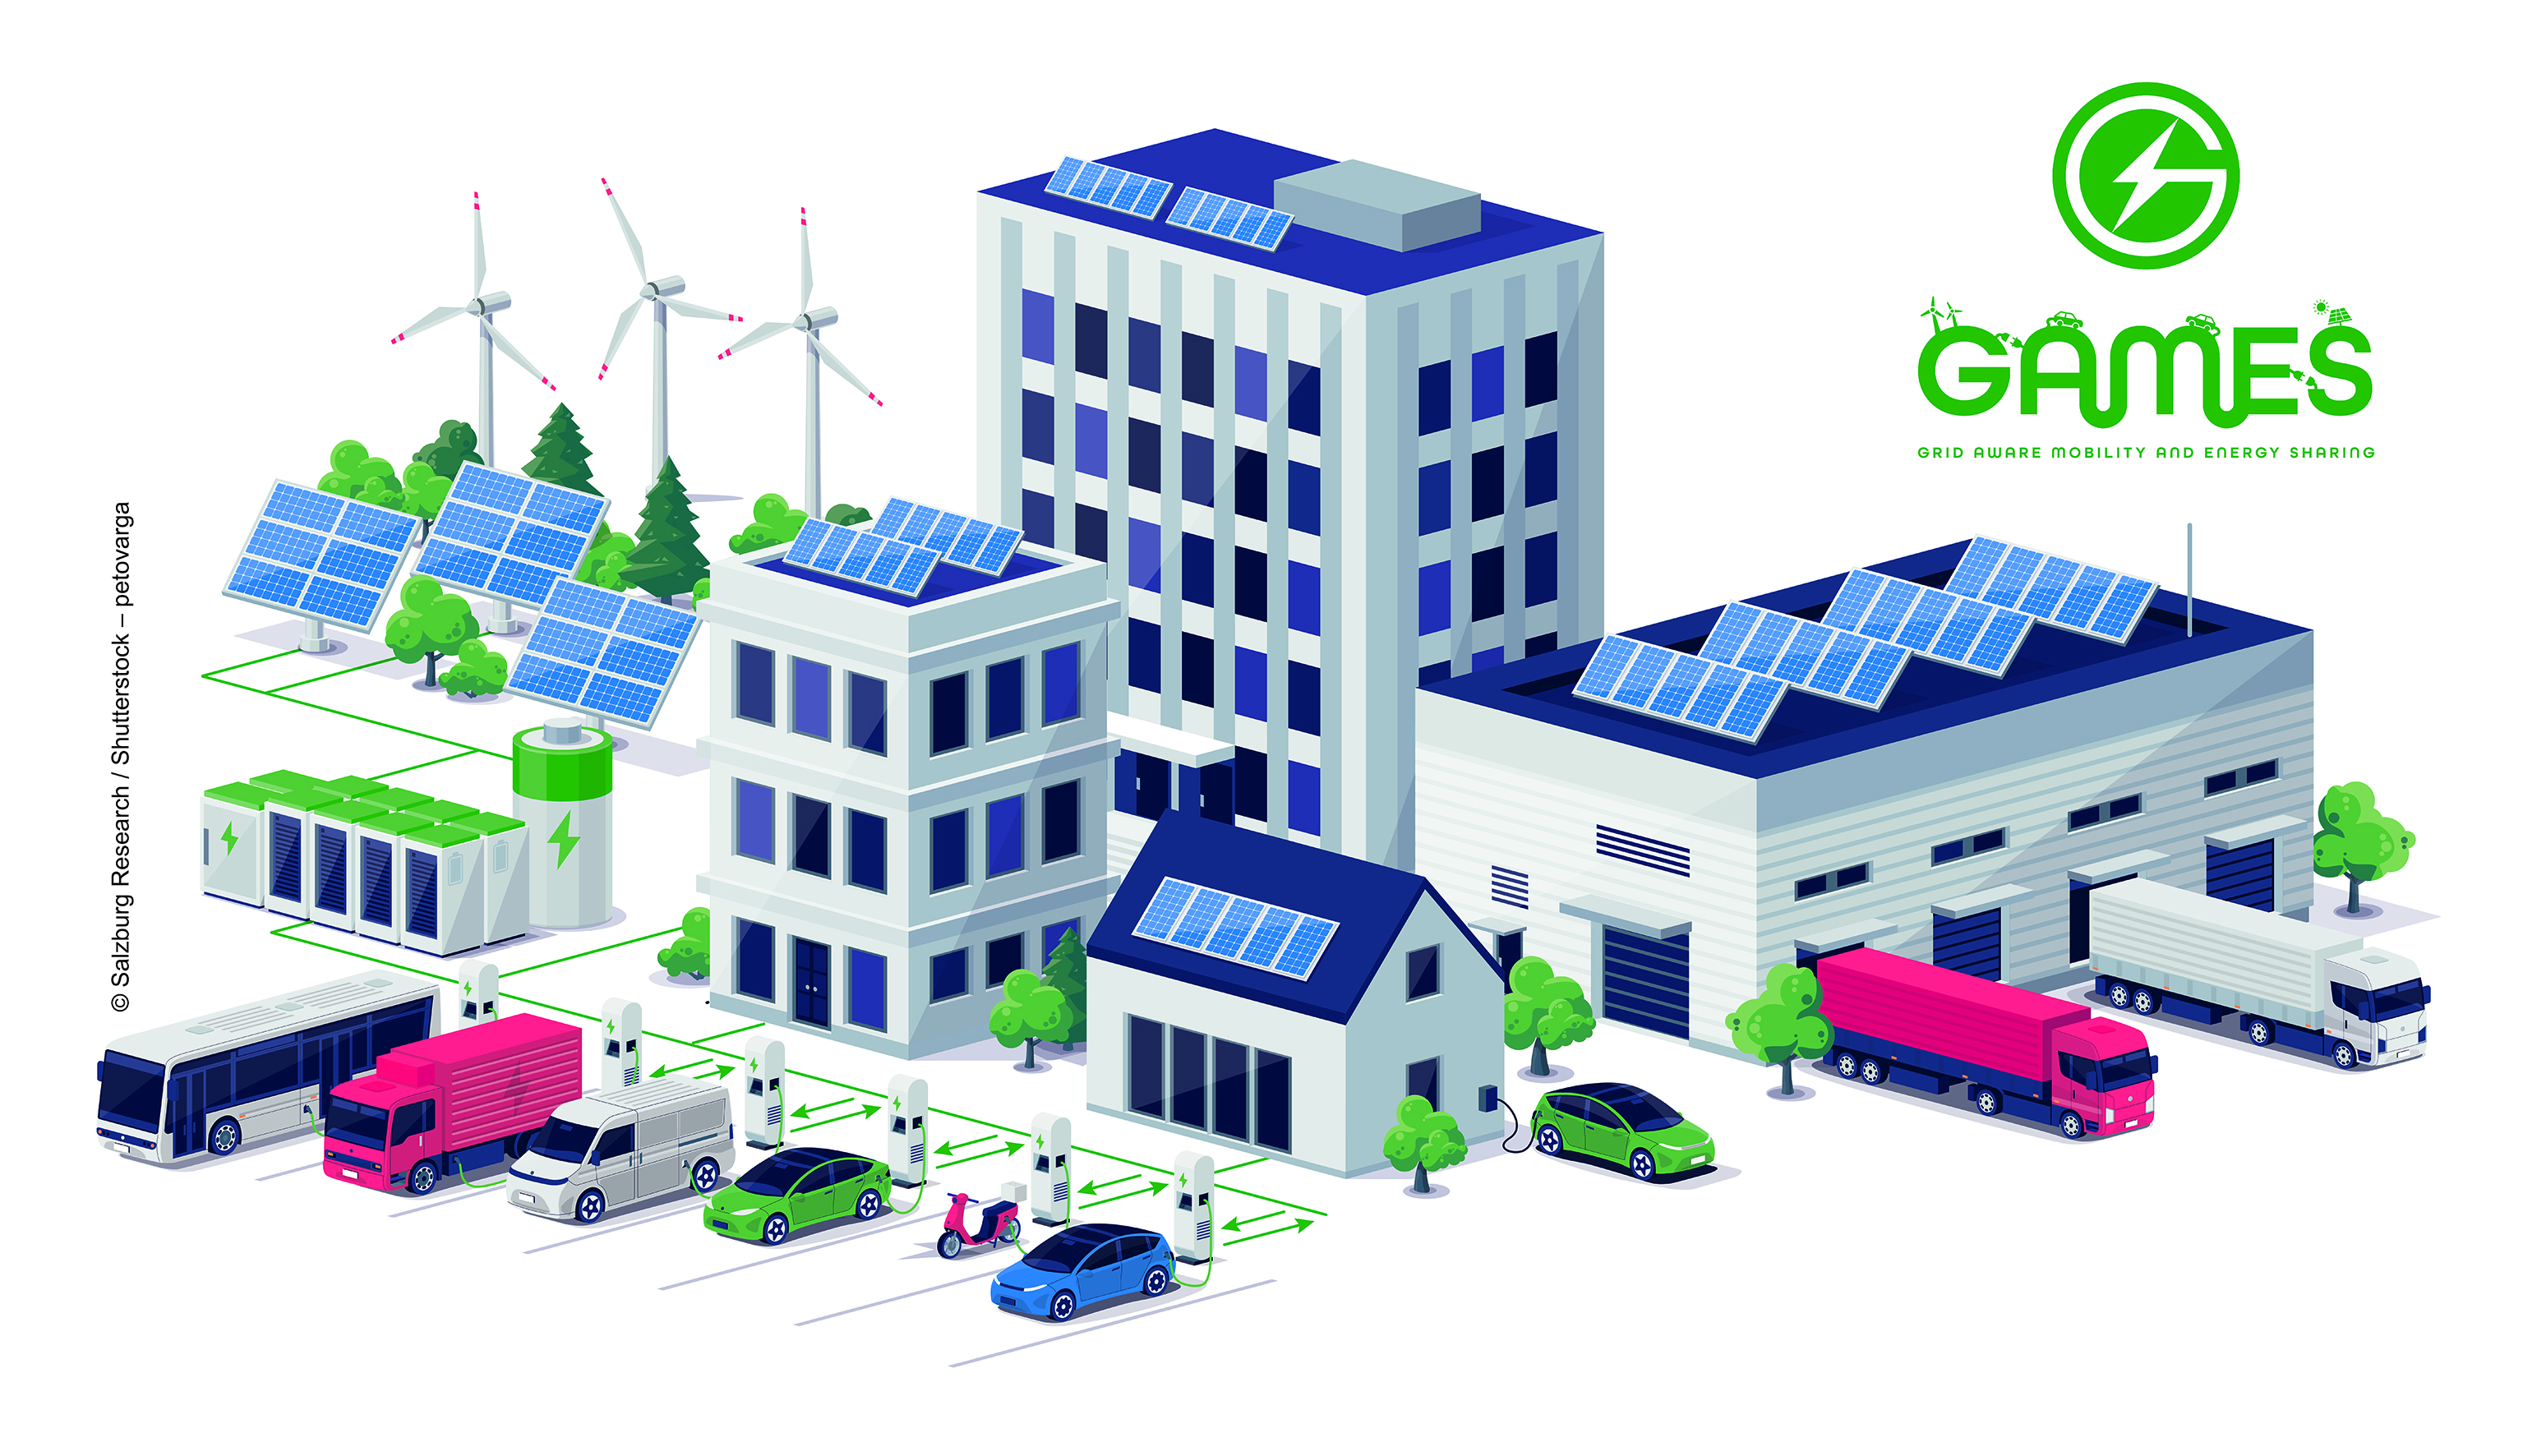 GAMES – Grid aware mobility and energy sharin